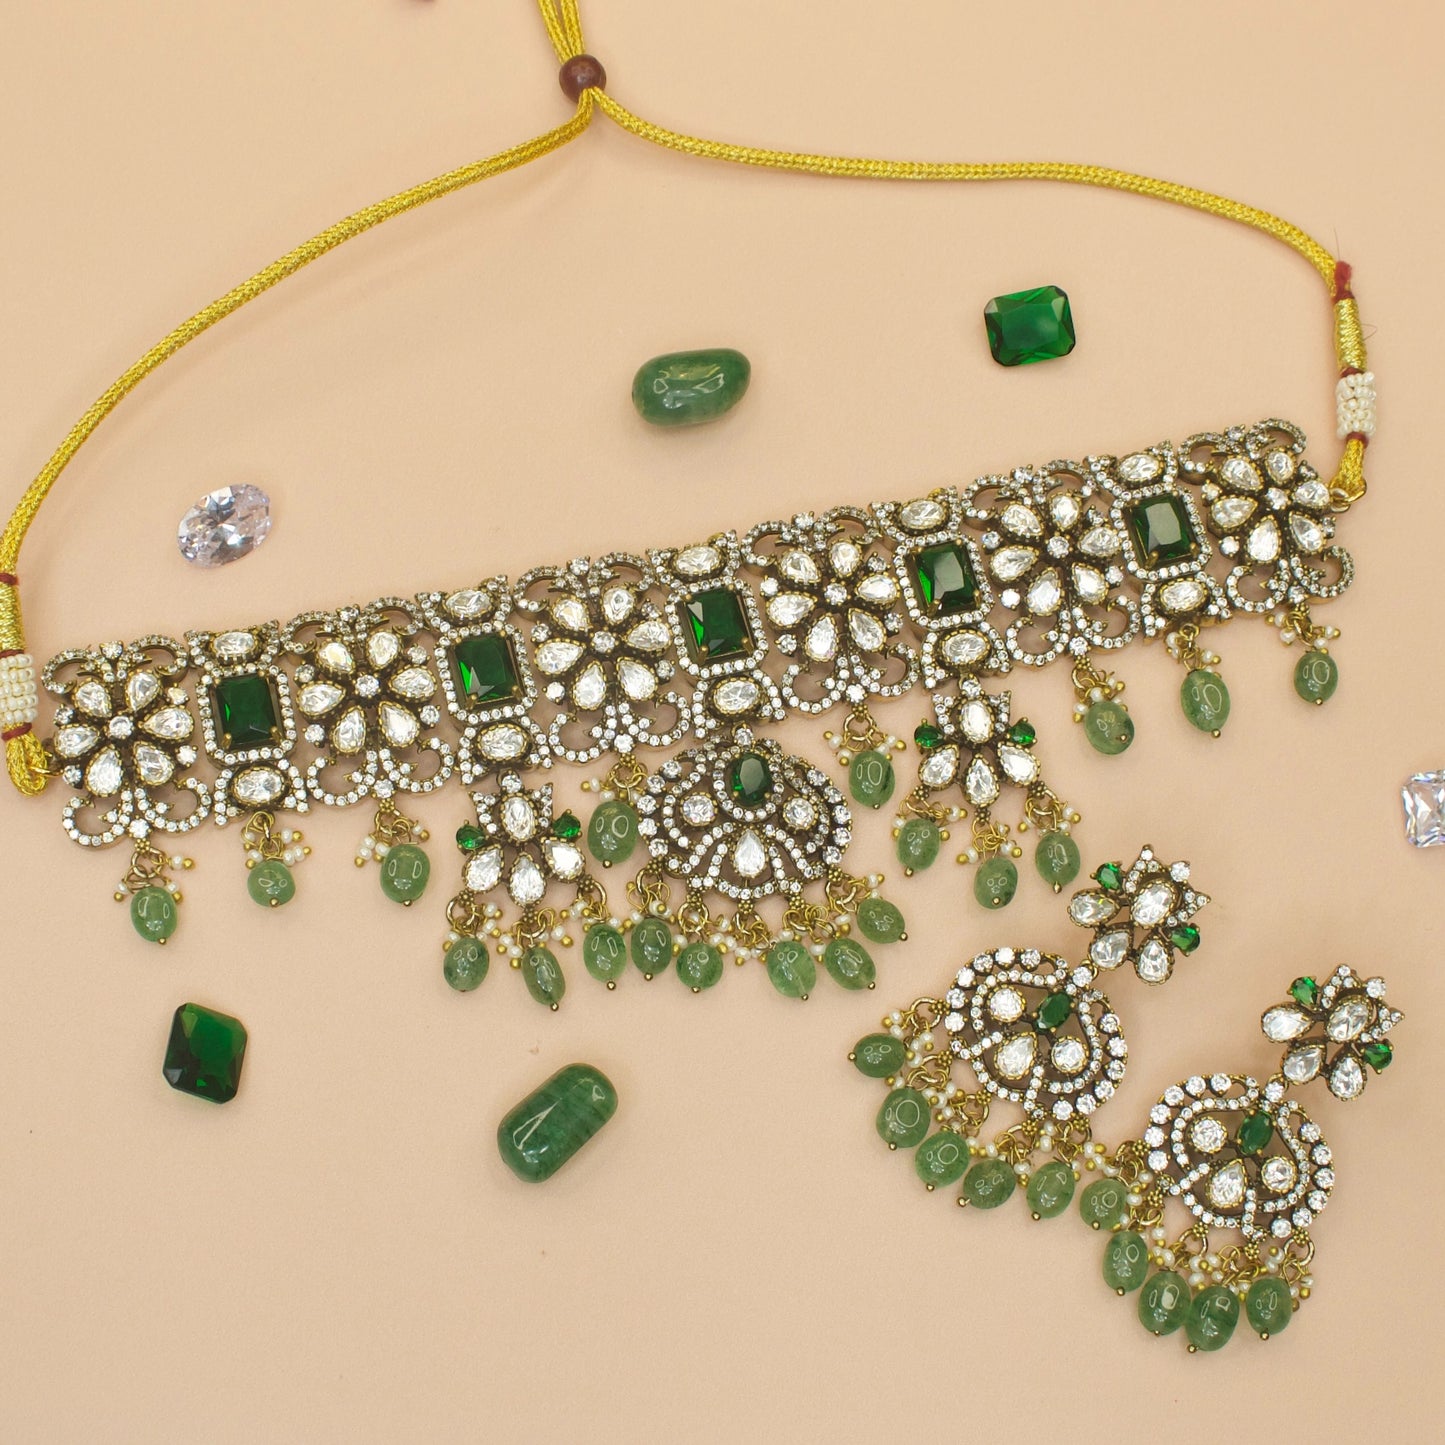 Regal Victorian Polki Choker Necklace Set
 with zircon, polki, pearls, and beads, including matching earrings. This Victorian Jewellery is available in Green & Purple colour variants. 